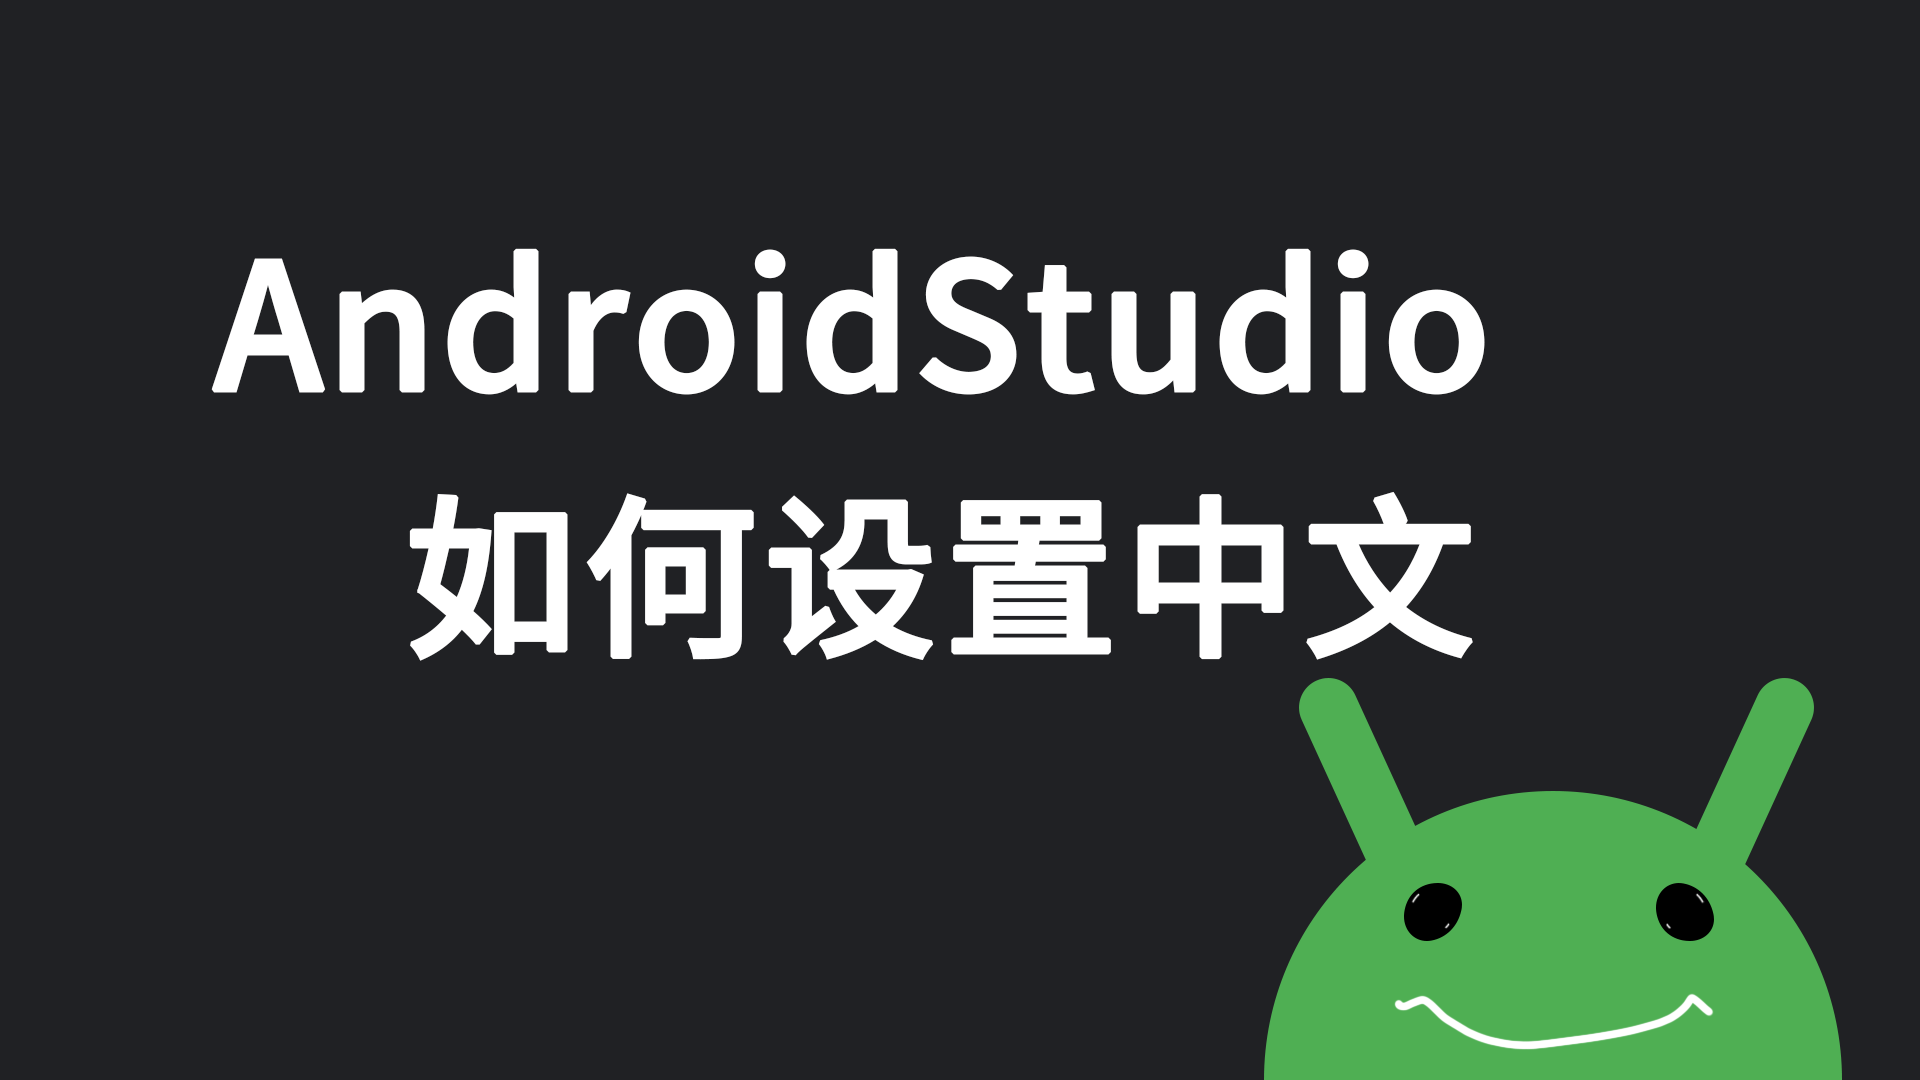 AndroidStudio如何设置中文.png